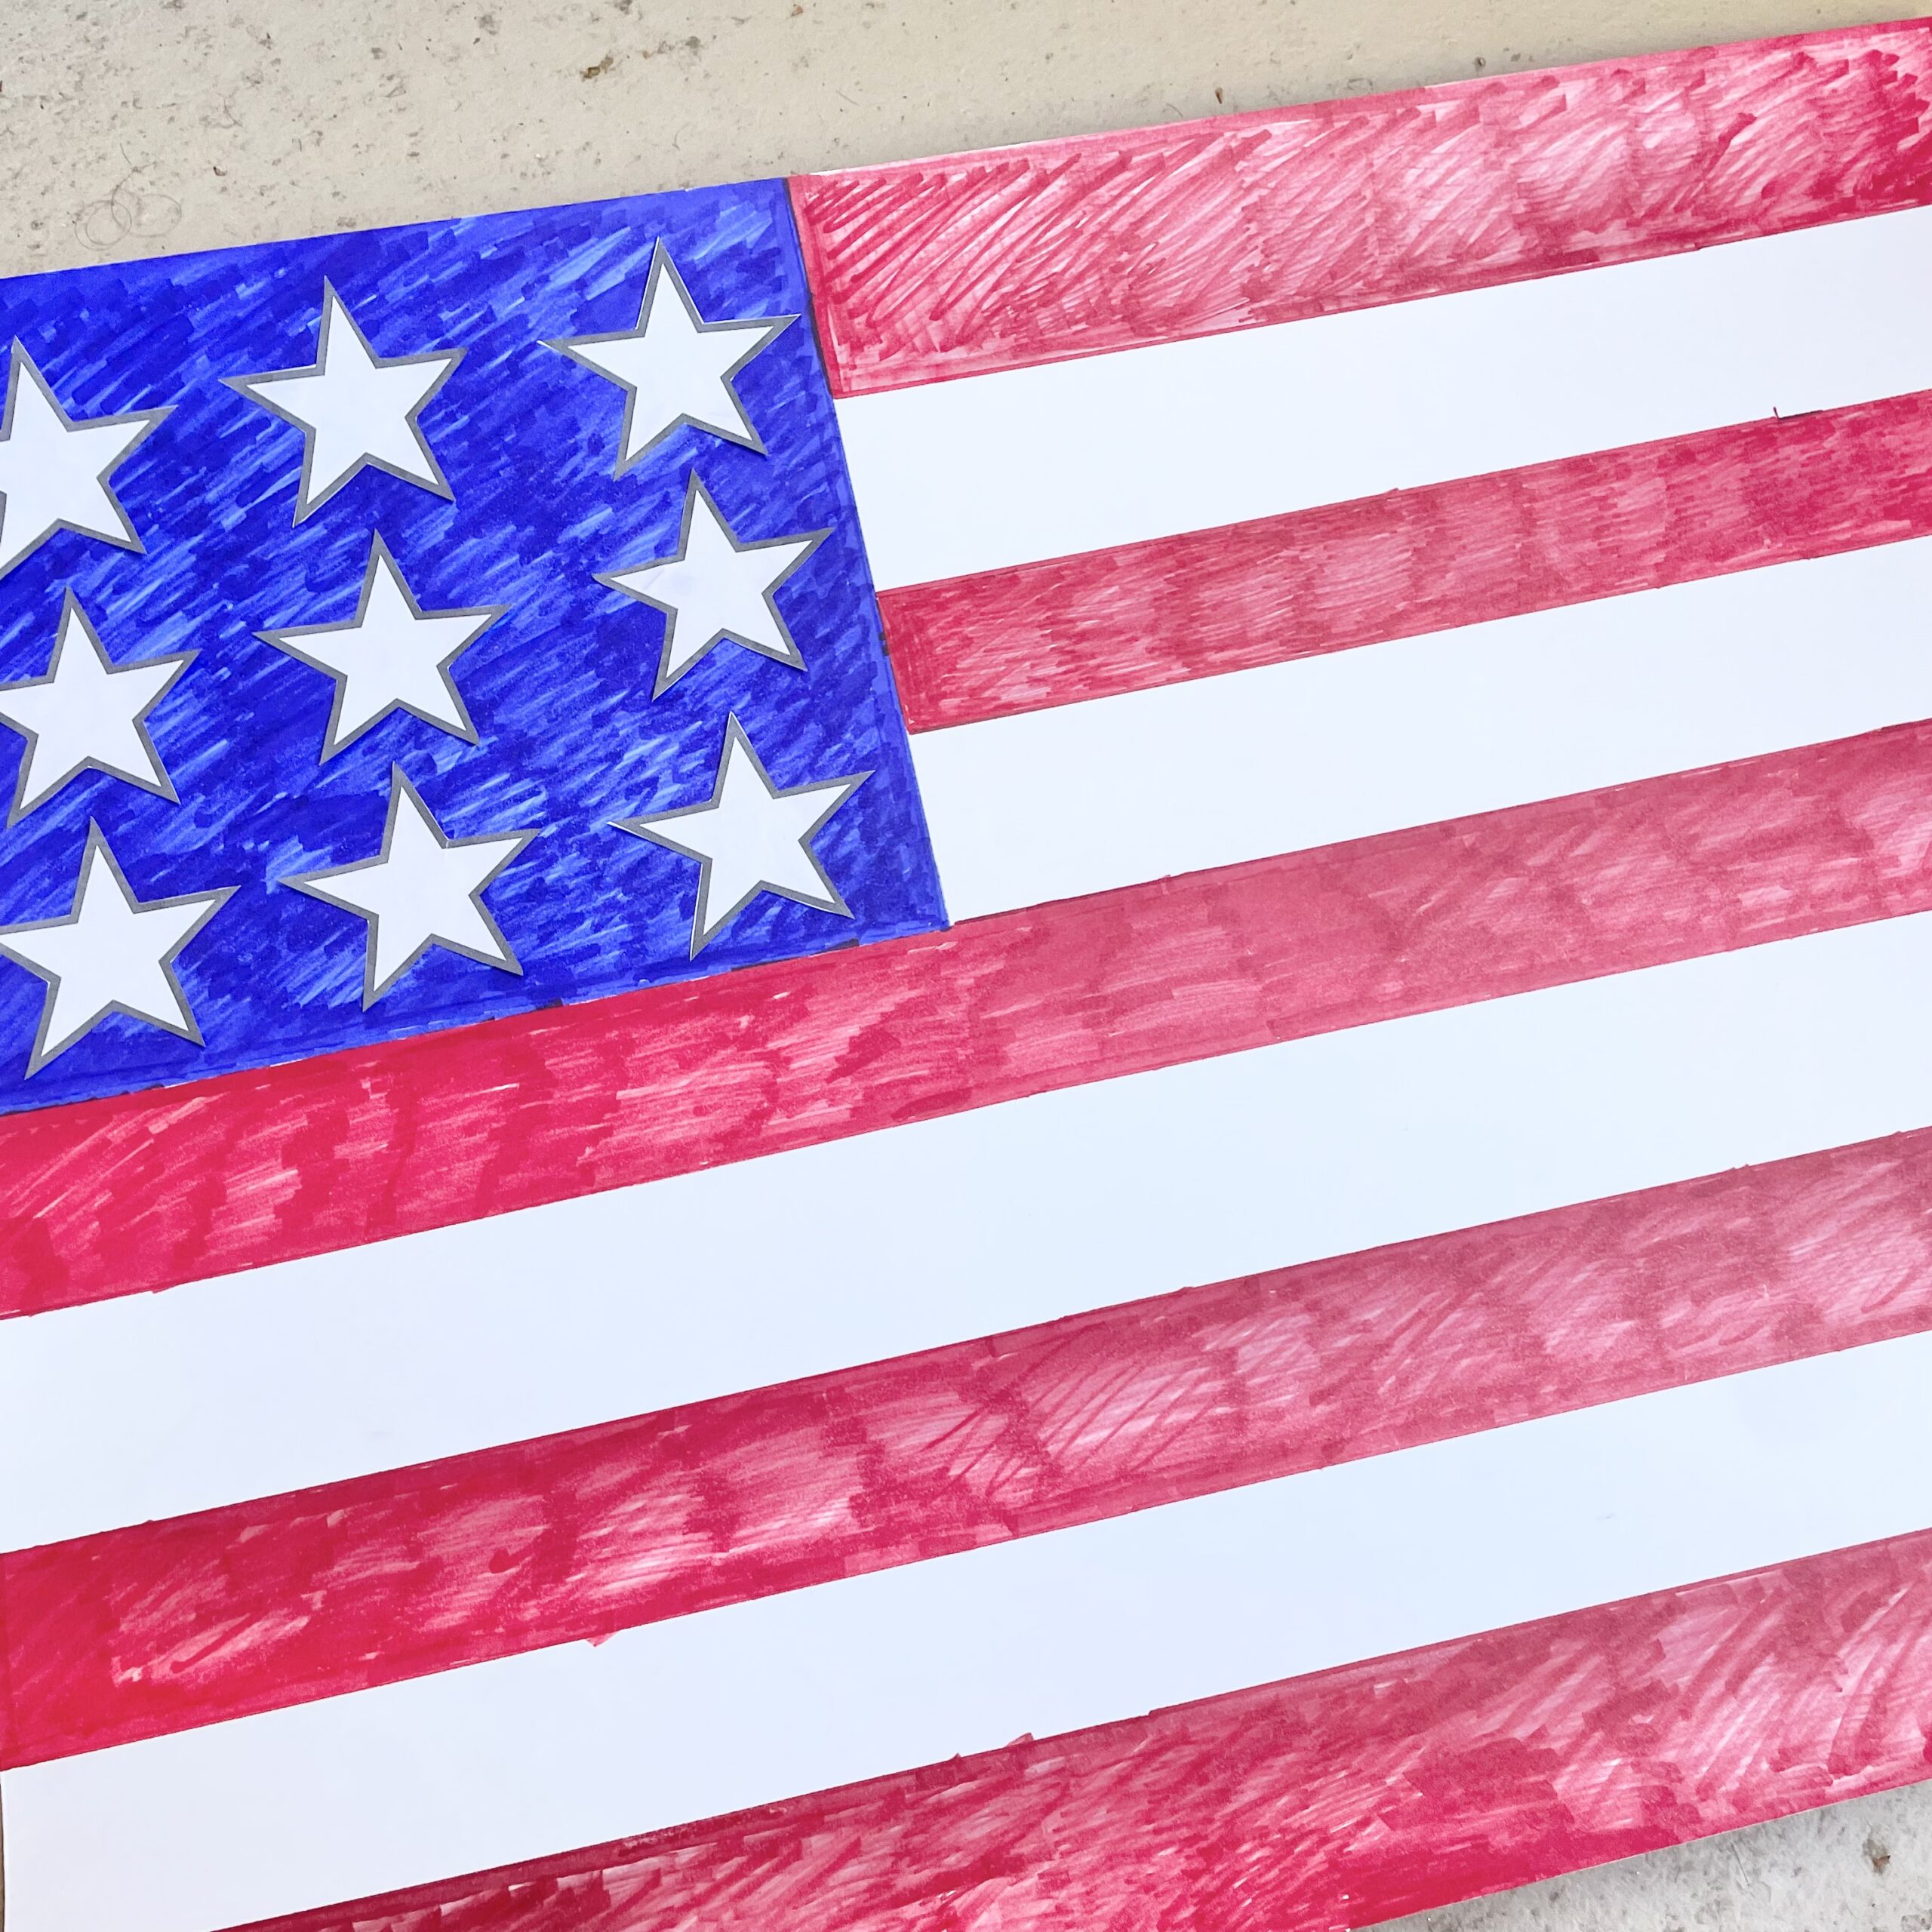 4th of July Pin the Star on the Flag! Try this fun patriotic singing time game by pinning the star on the flag while reviewing songs for LDS Primary Music Leaders.